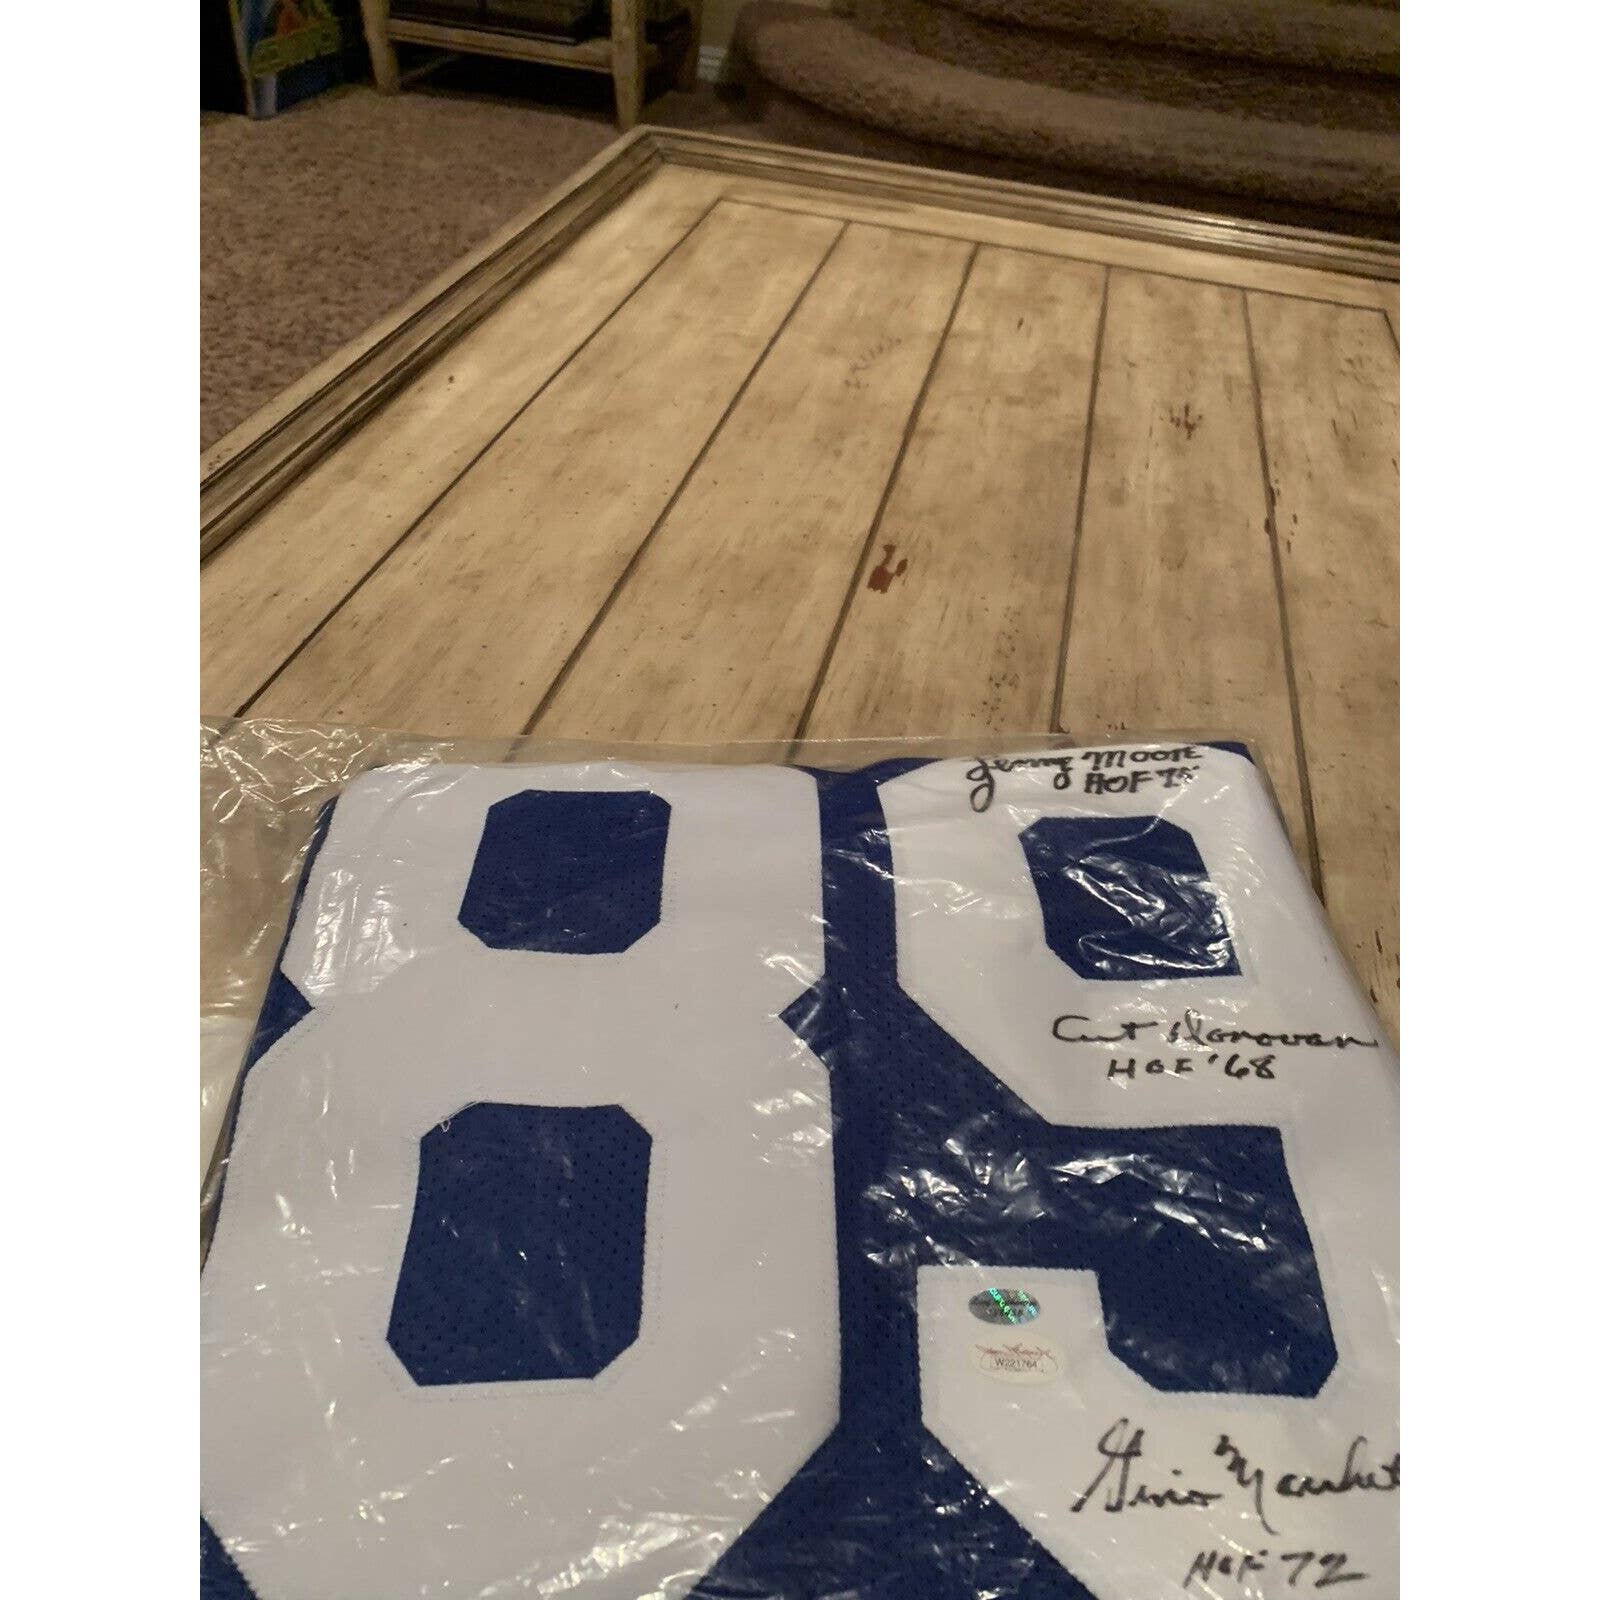 Donovan Moore Marchetti Autographed/Signed Jersey Indianapolis Colts Baltimore - TreasuresEvolved